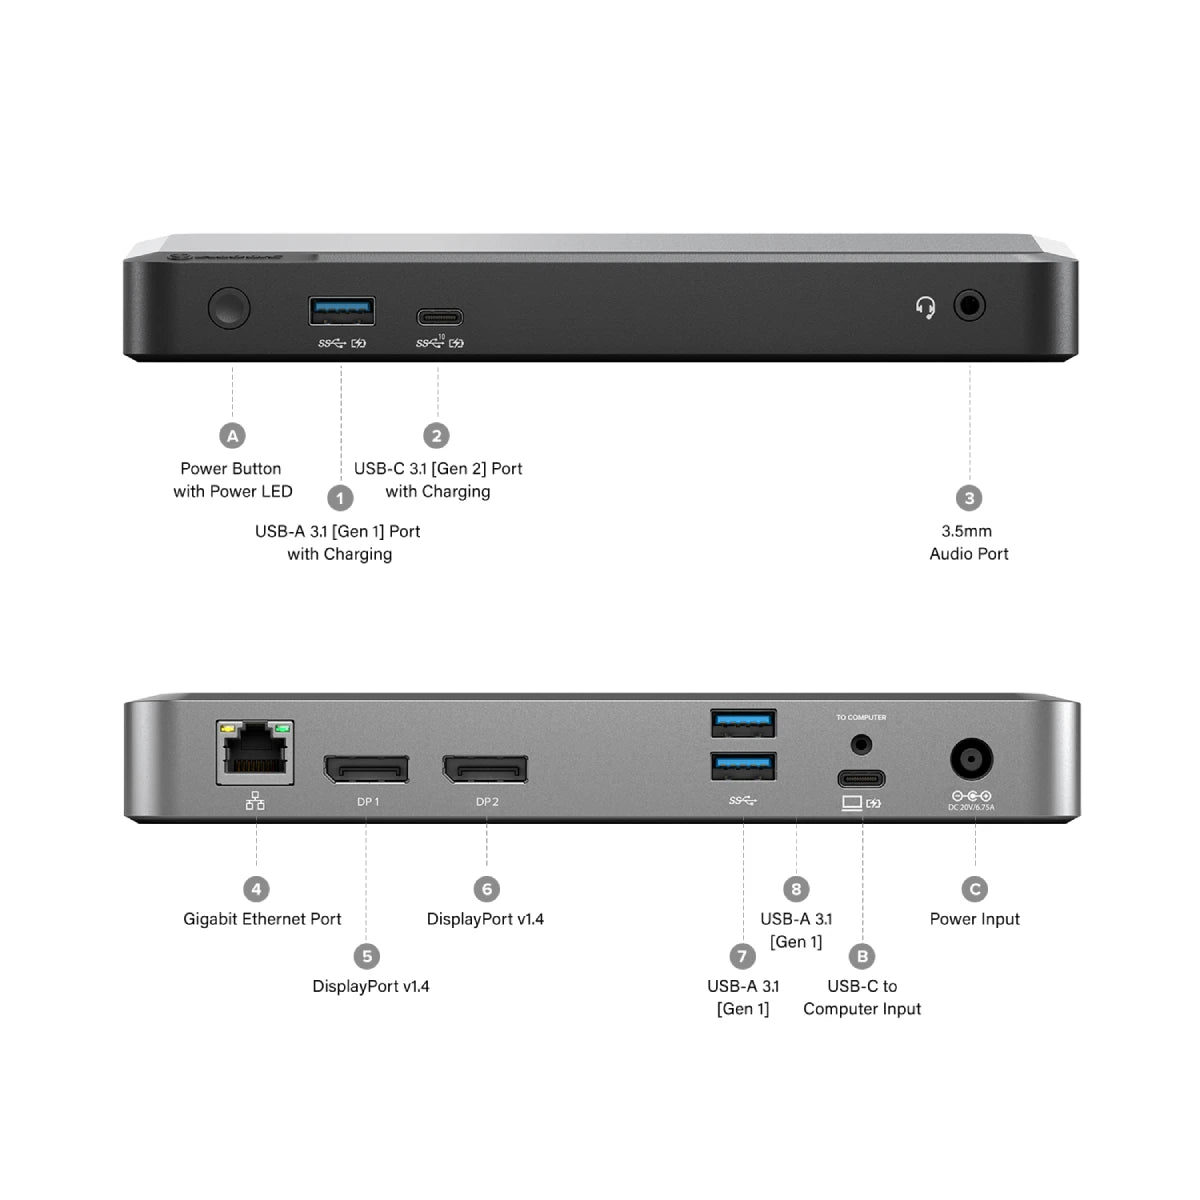 USB-C 8-in-1 Docking Station with Power Delivery